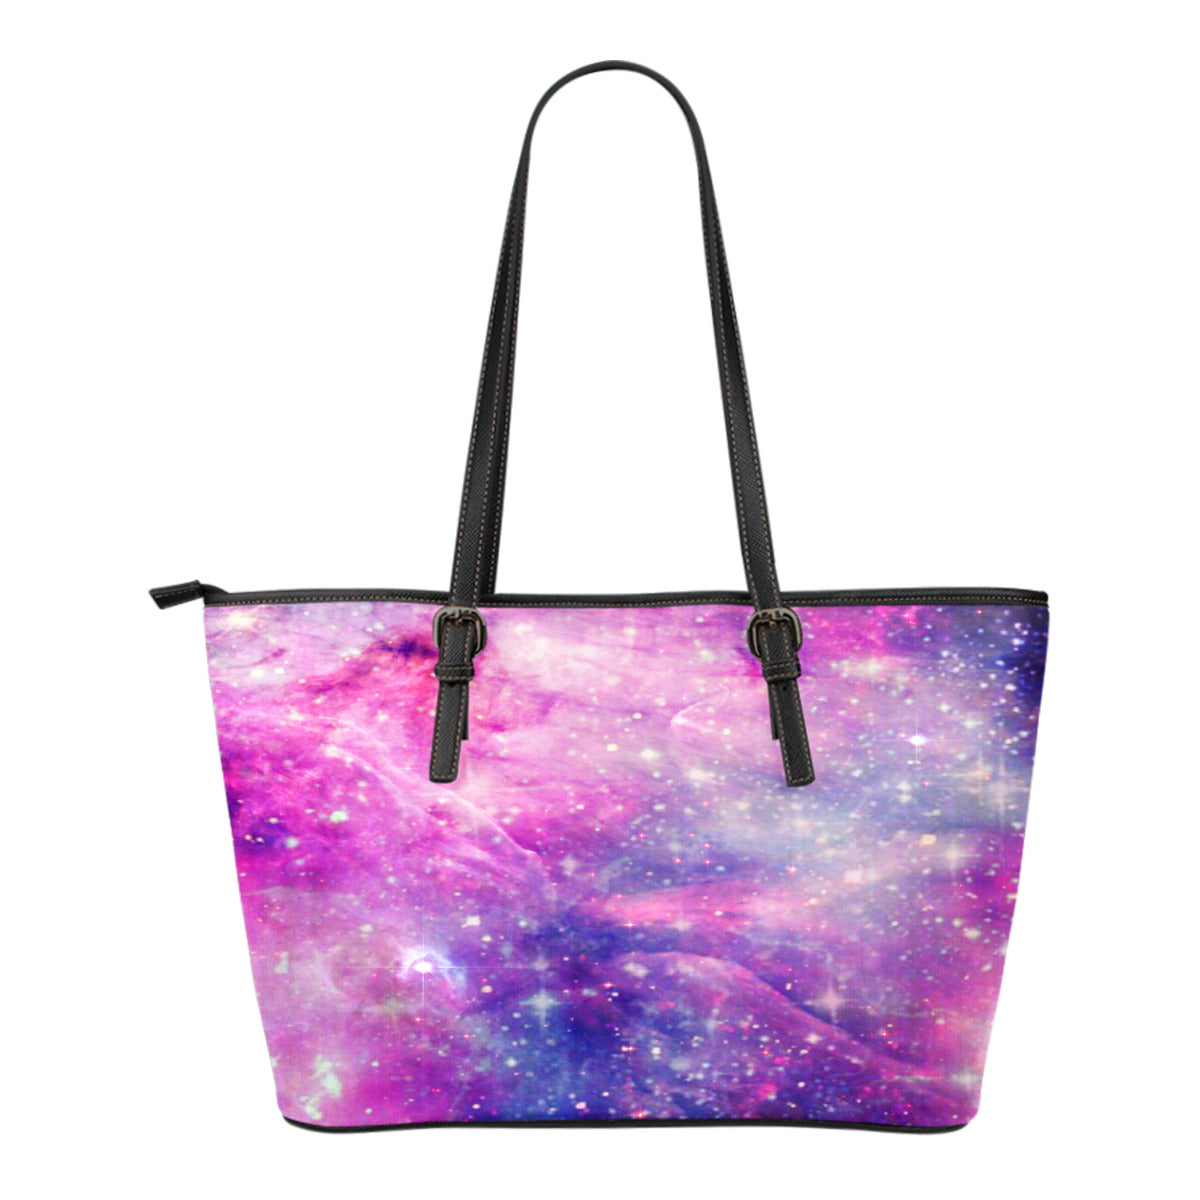 Pastel Galaxy Themed Design C1 Women Small Leather Tote Bag